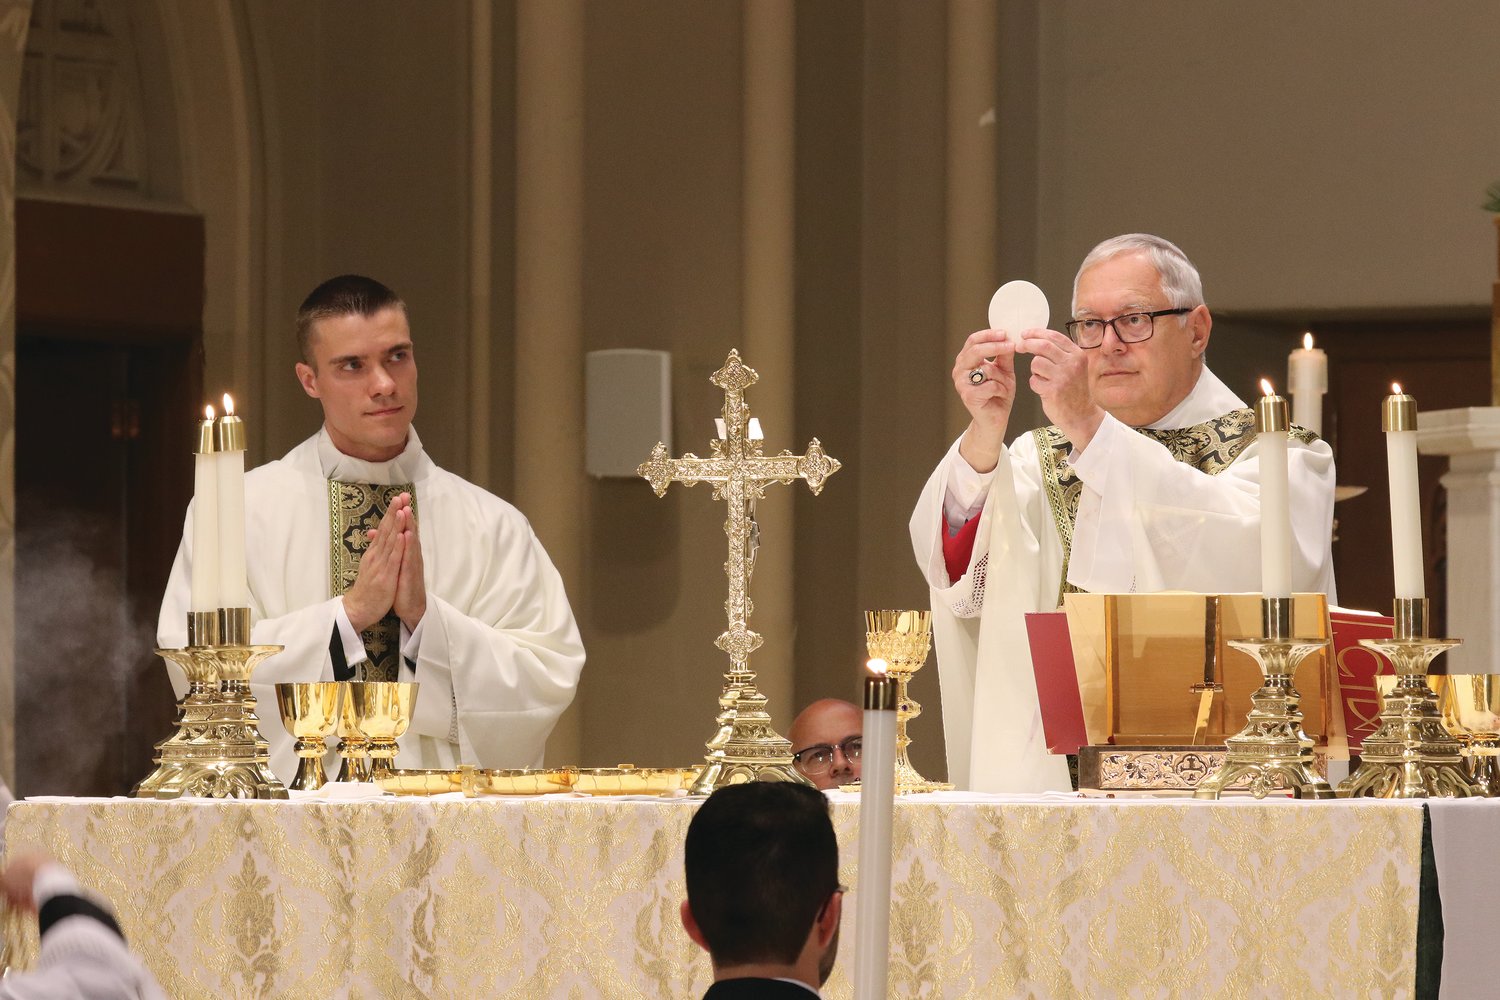 The newly ordained concelebrates Mass with Bishop Thomas J. Tobin.